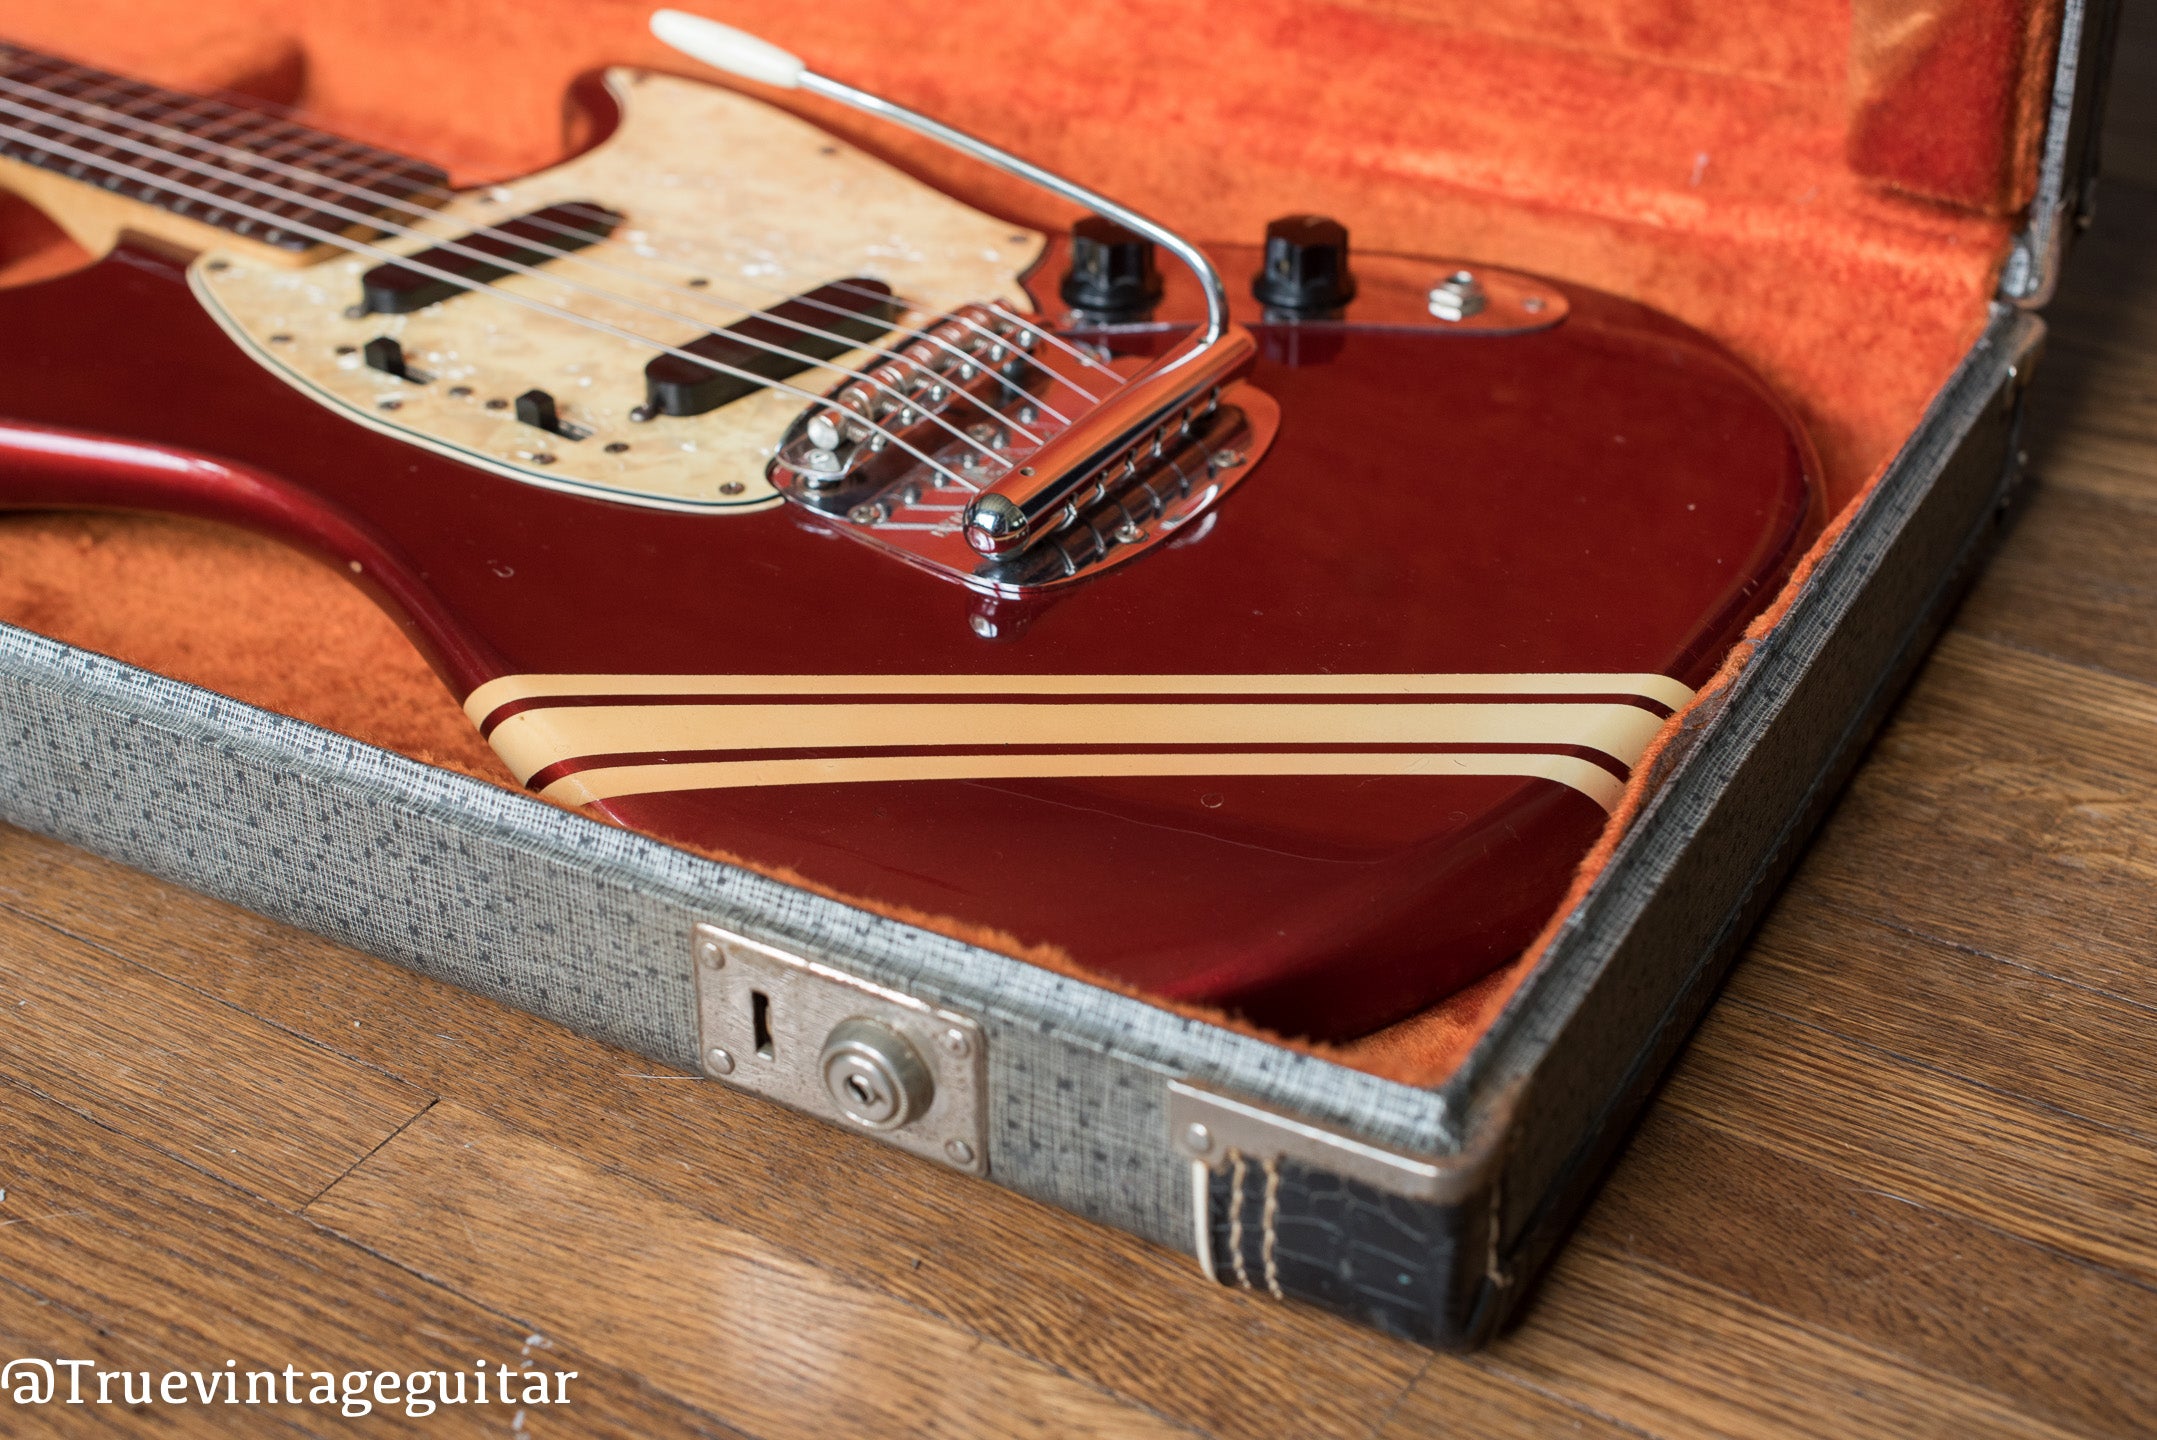 White racing stripes over red finish, 1969 Fender Mustang Competition